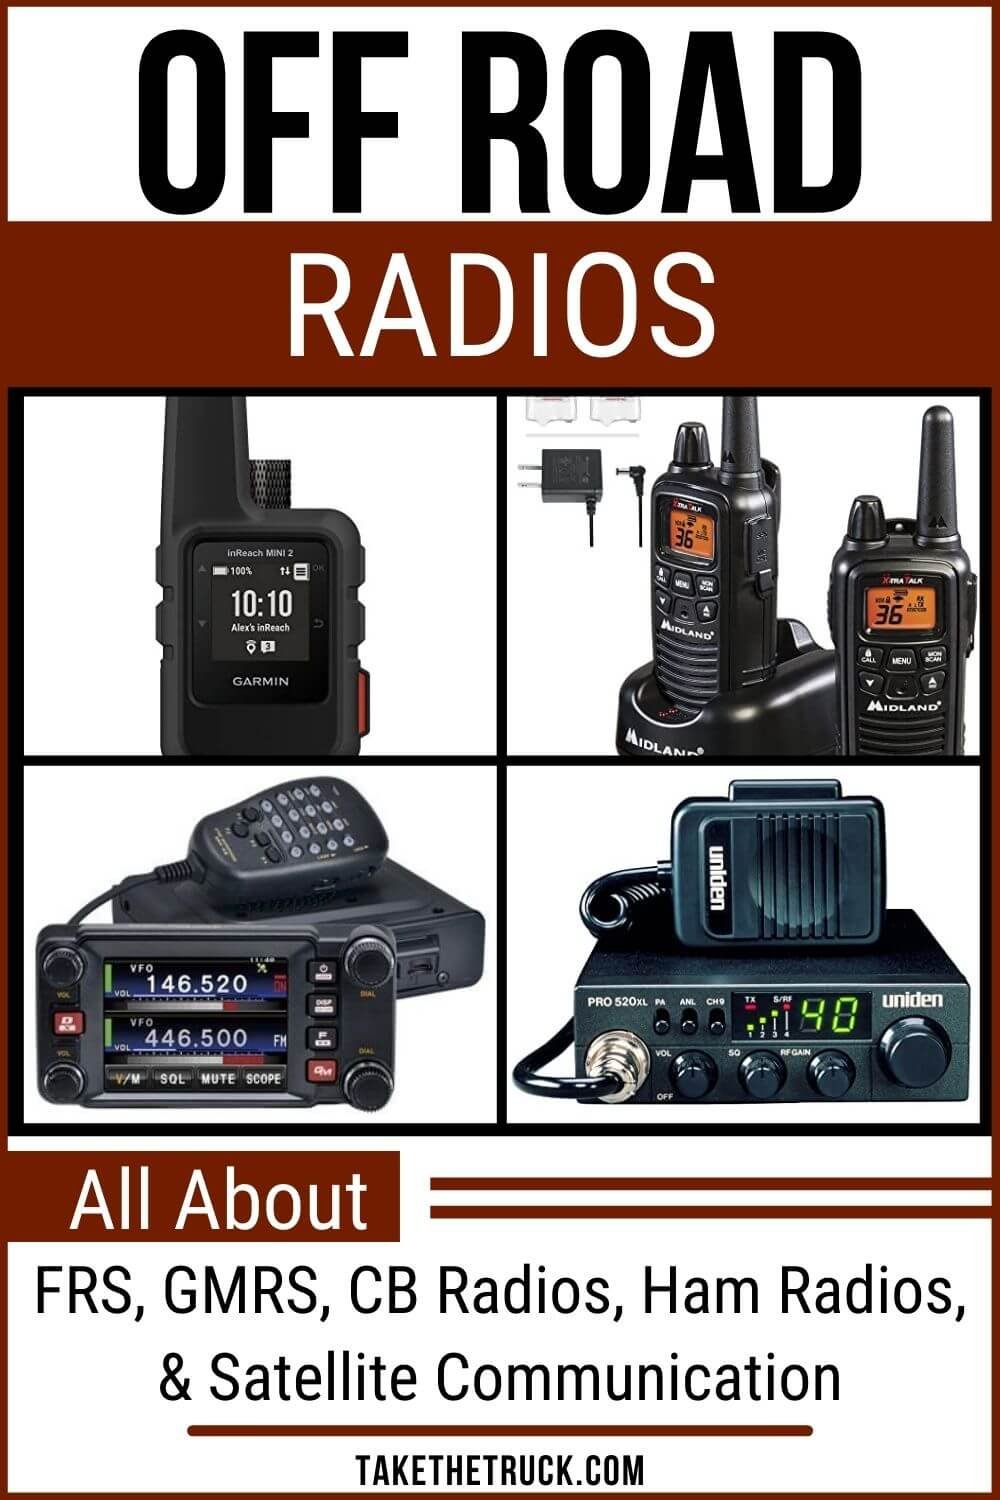 Overland communication and off road communication options from FRS, GMRS, CB radios, overland ham radios, to satellite communication. Find the best off road radio or overlanding communications.